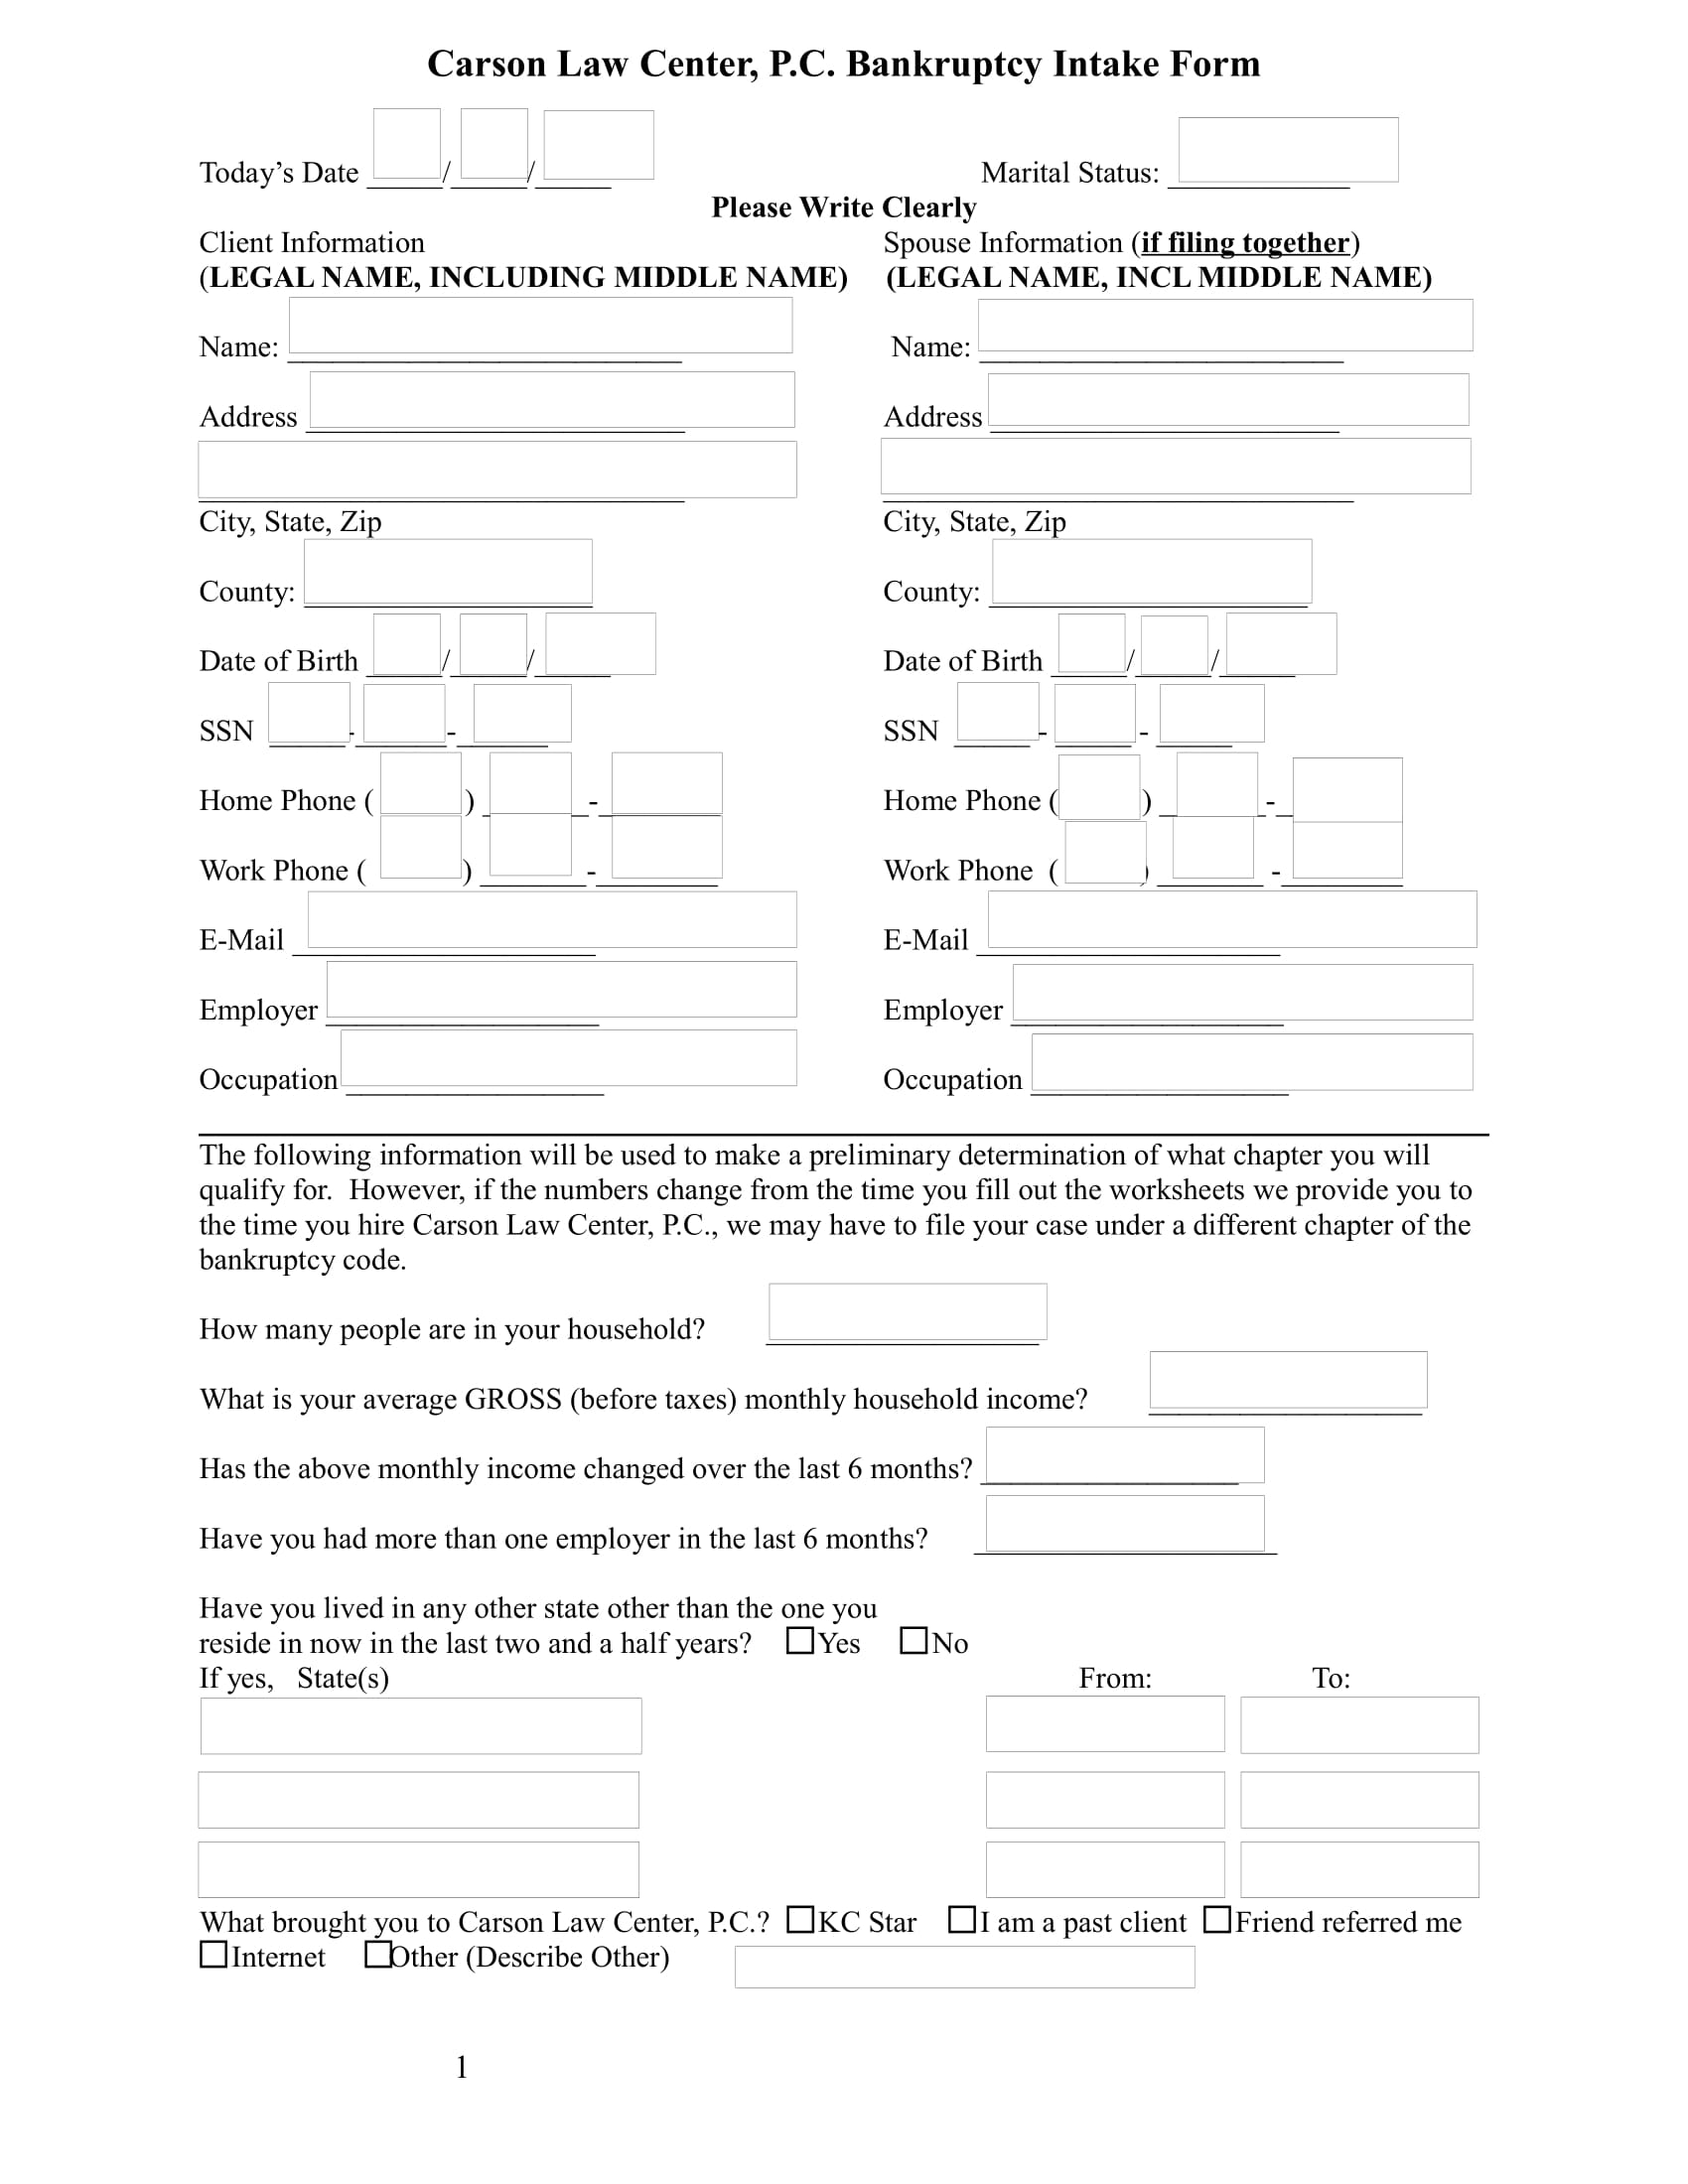 law center bankruptcy intake form 1